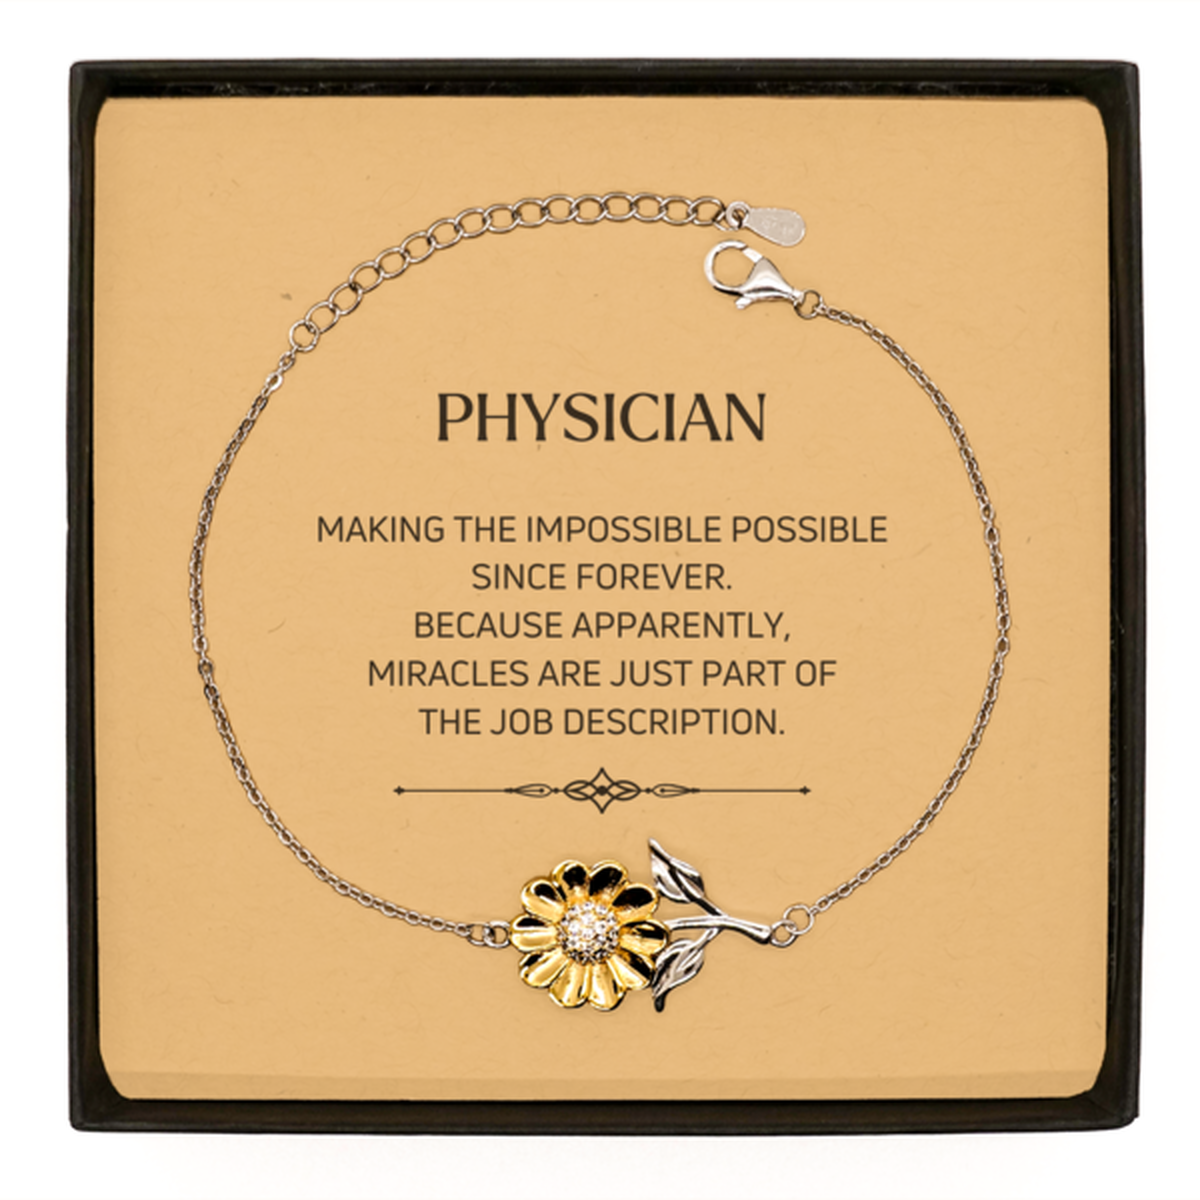 Funny Physician Gifts, Miracles are just part of the job description, Inspirational Birthday Sunflower Bracelet For Physician, Men, Women, Coworkers, Friends, Boss